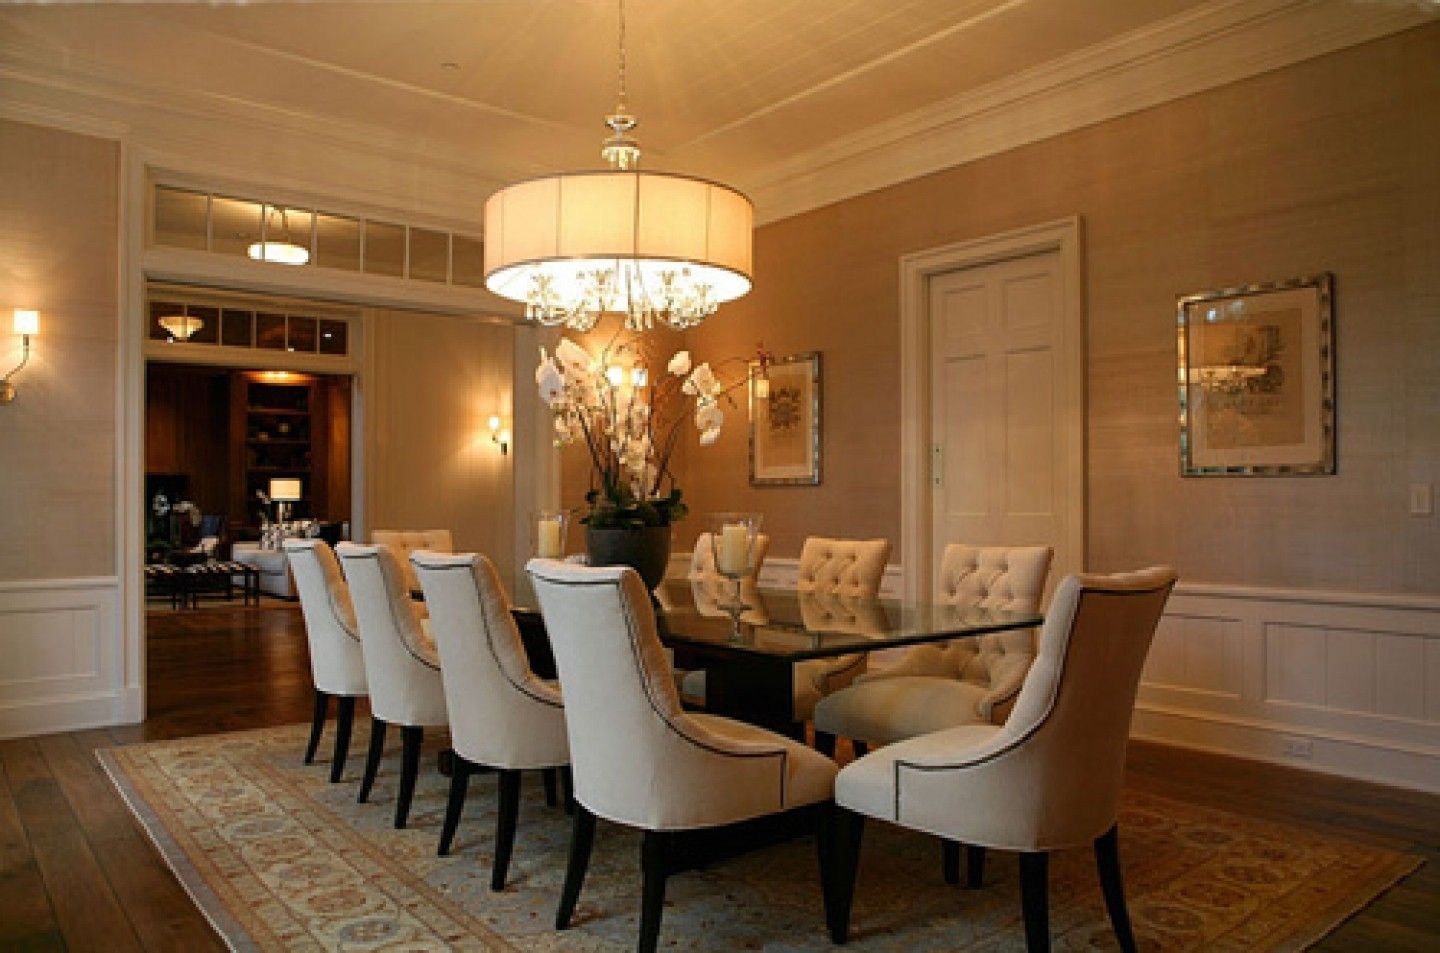 Remarkable Drum Chandelier Shades Fancy Lights Hung And Cream Within Large Cream Chandelier (View 12 of 12)